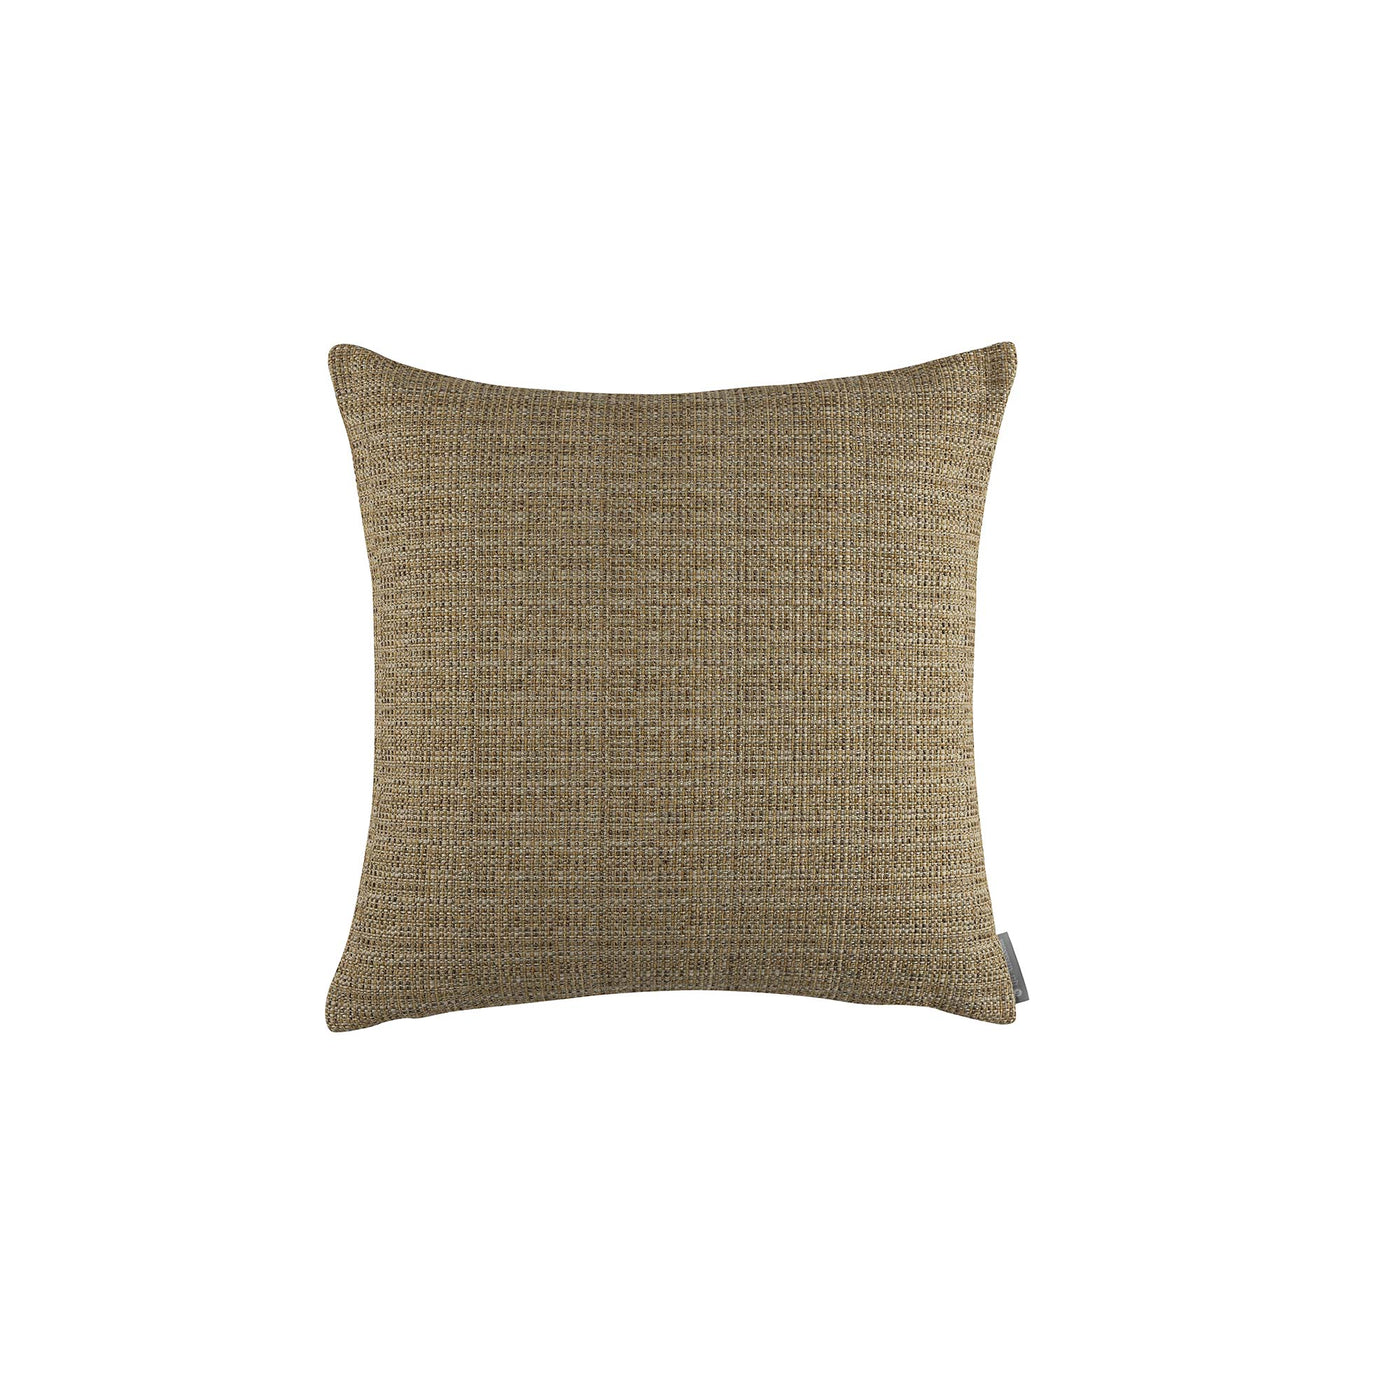 Jacqueline Sisal Small Square Pillow (22x22)